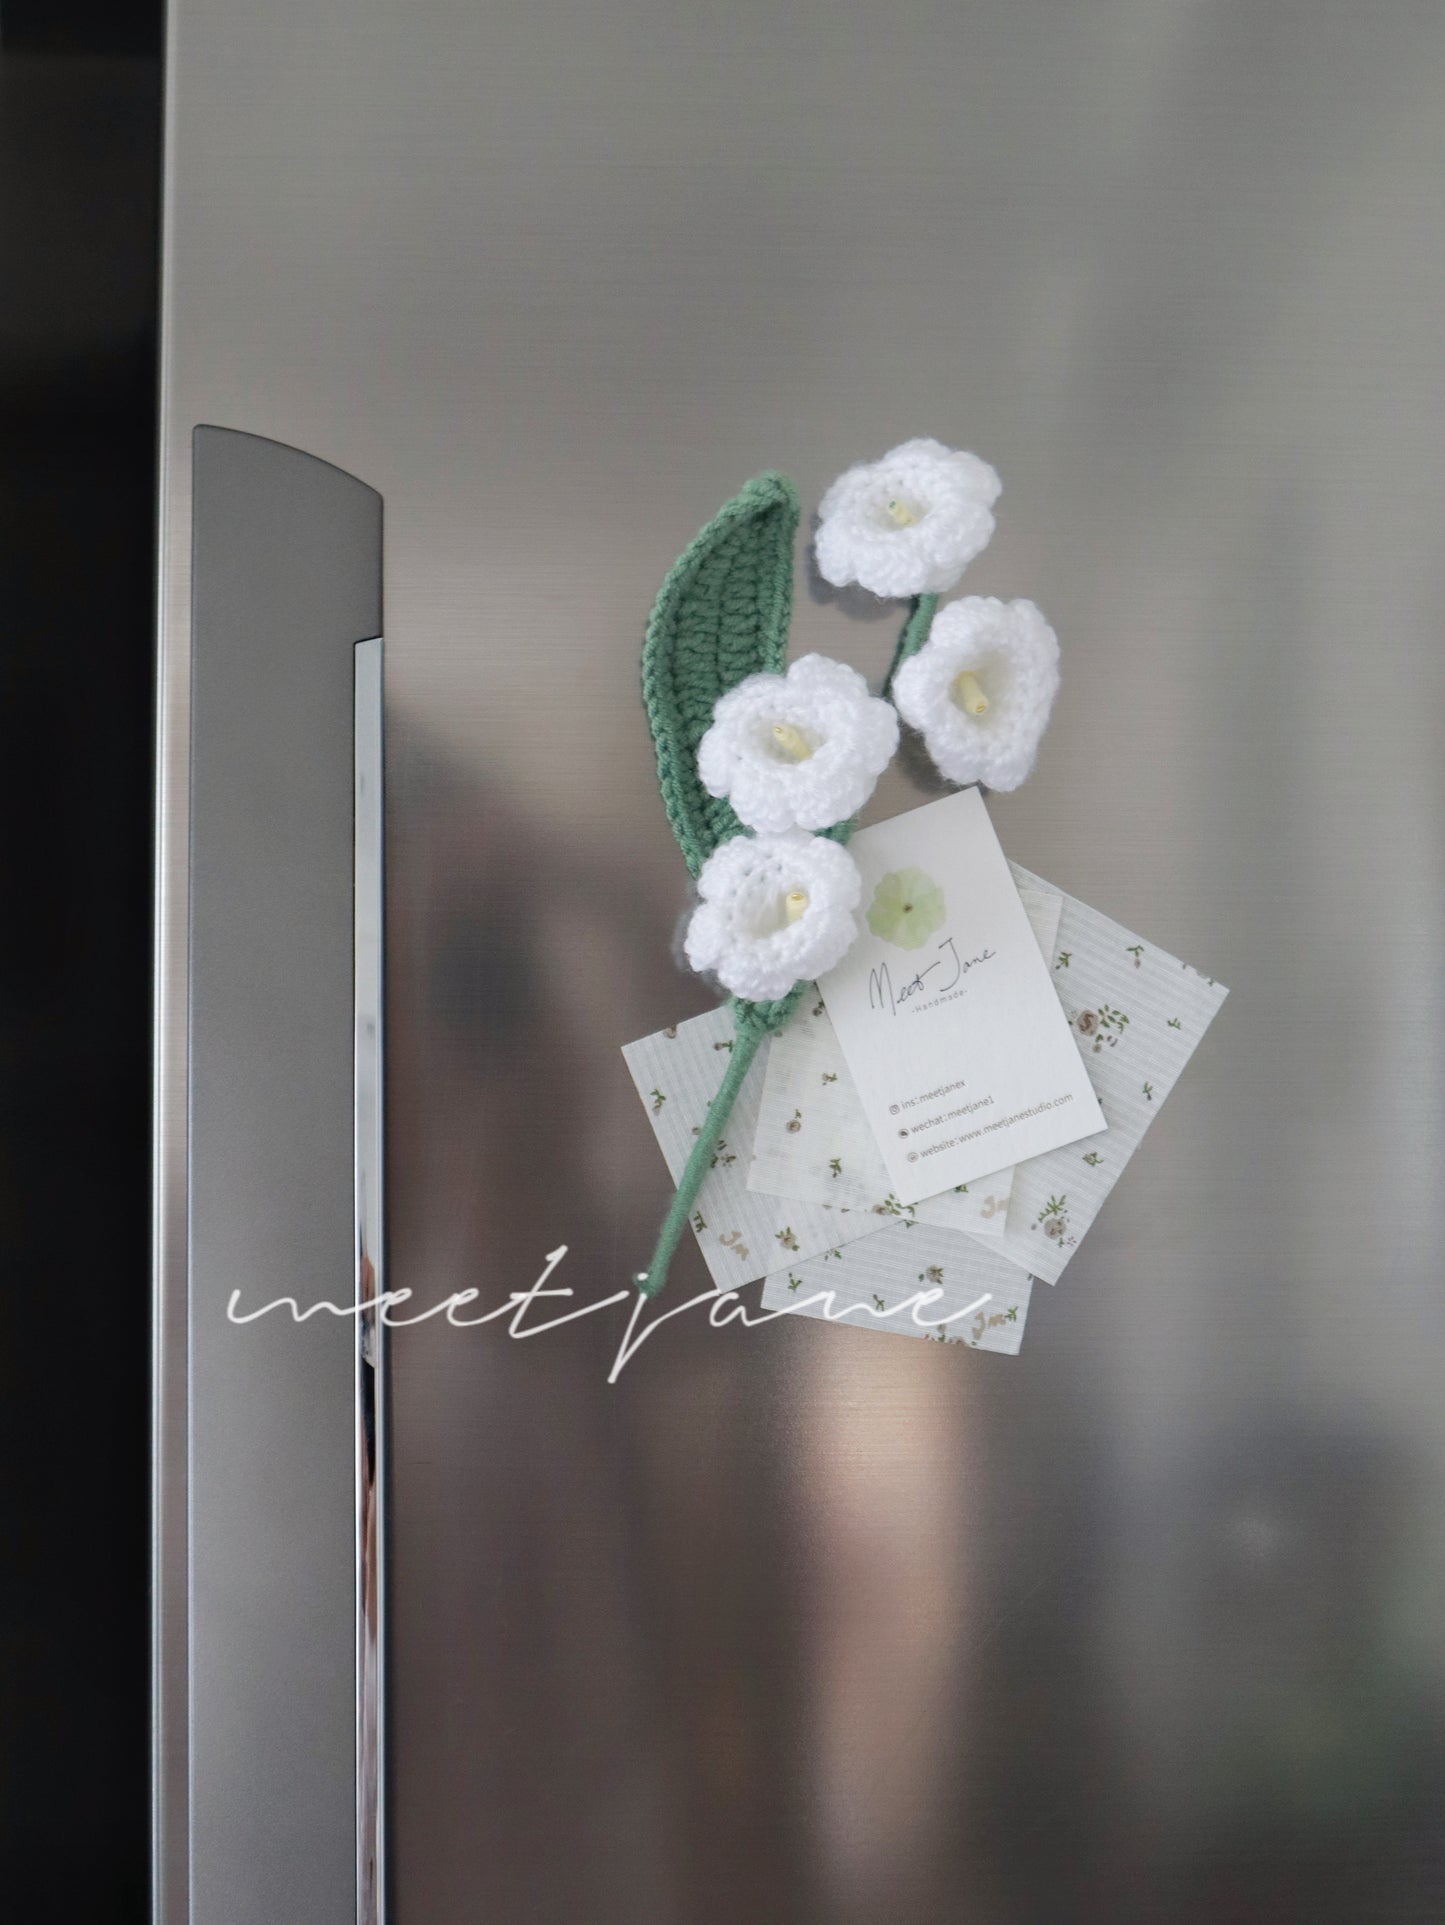 Meetjane bouquet|Melbourne handmade |Lily of the valley | Magnet